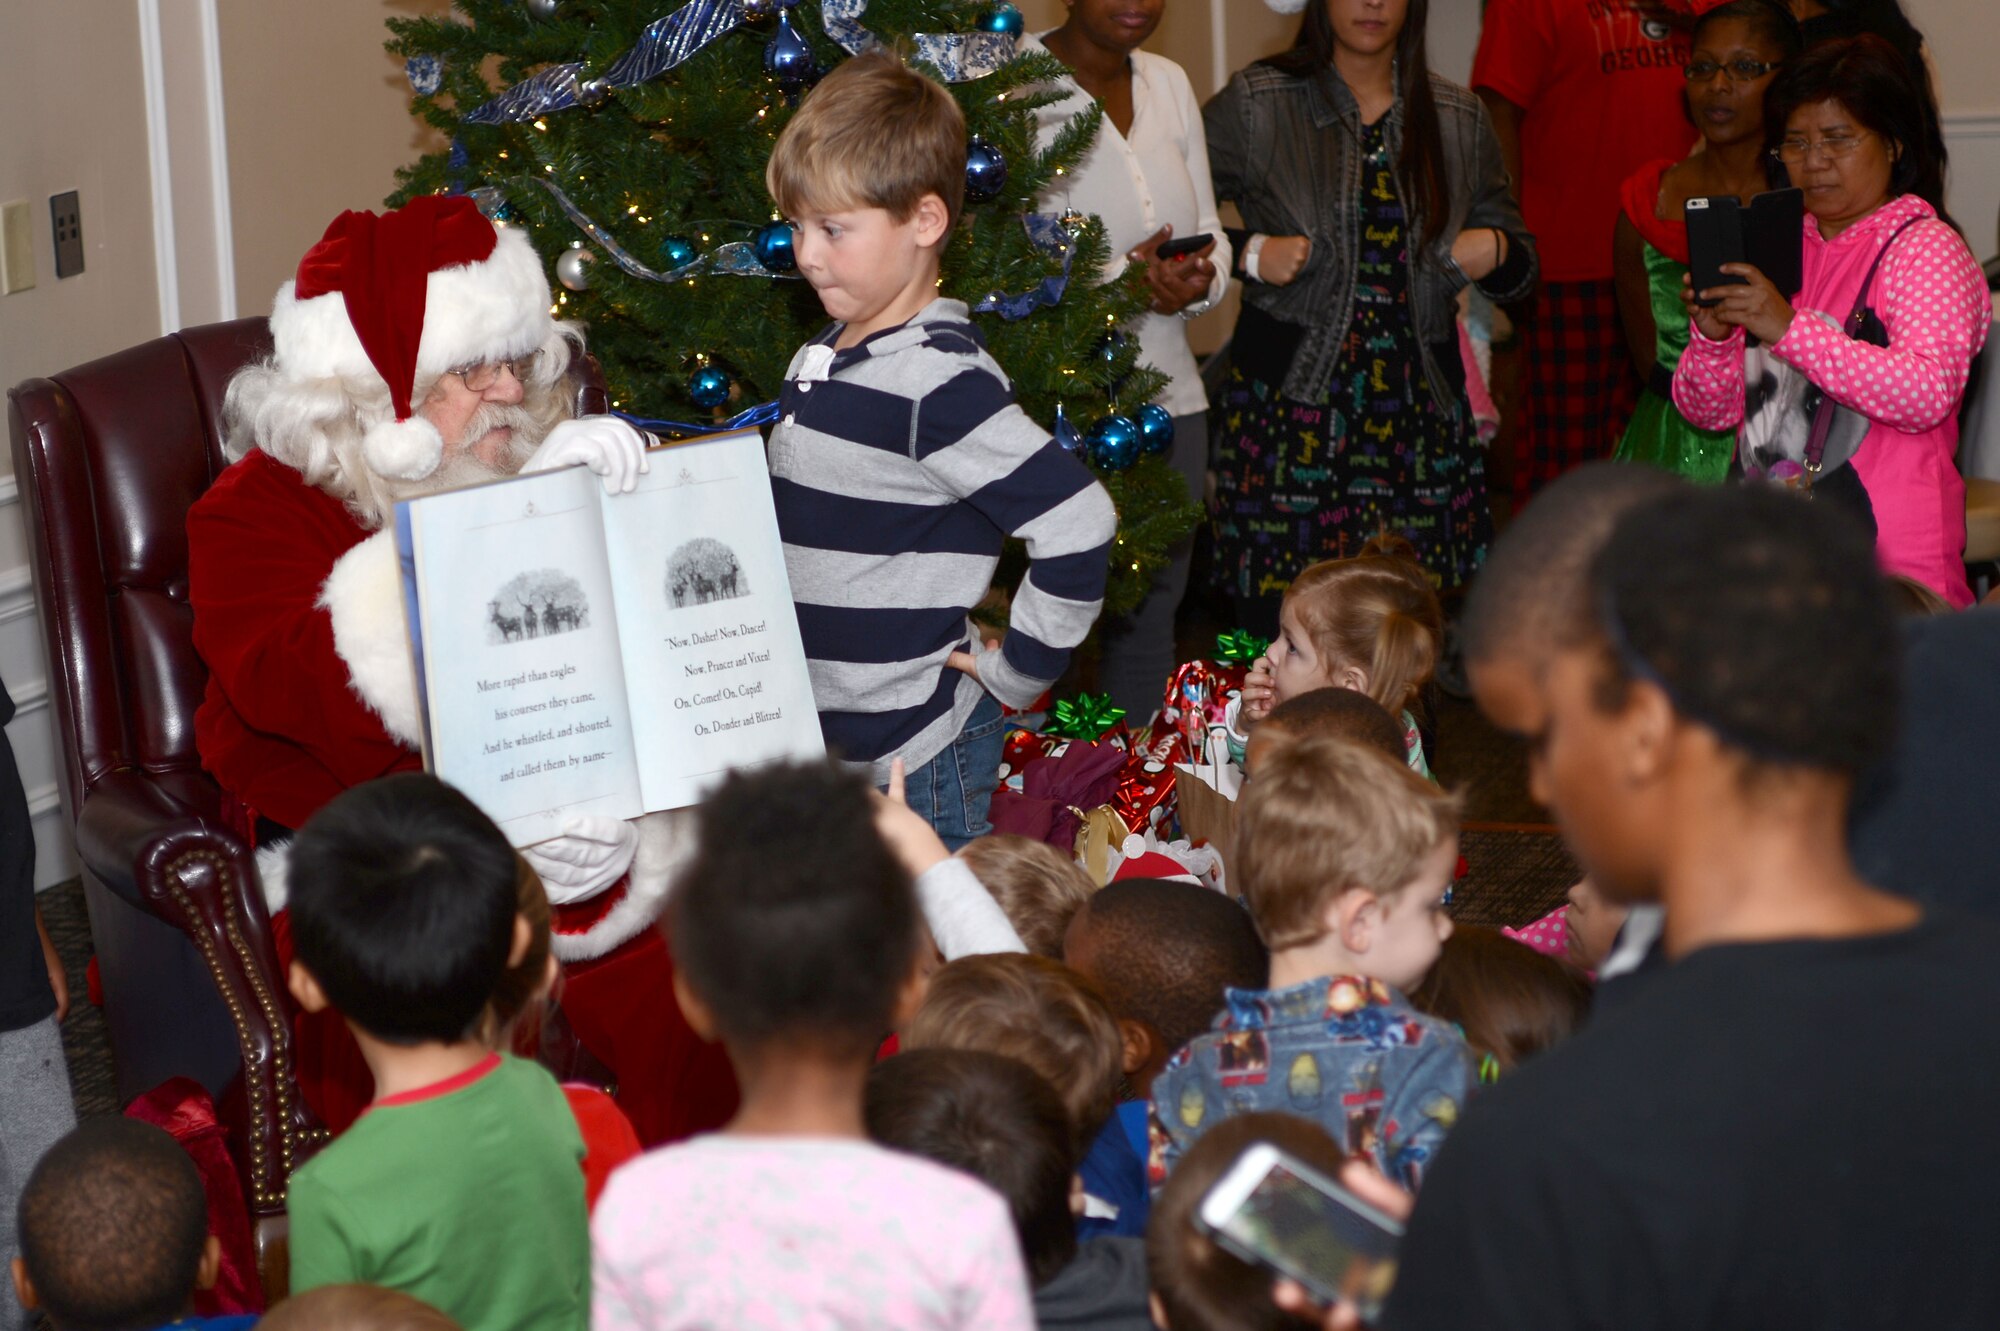 Santa Claus and his helper Joshua Saine, child of U.S. Army Col. Sam Saine, U.S. Army Central 4th Battlefield Coordination Detachment commander,  read a story to Team Shaw children at the Carolina Skies Club and Conference Center at Shaw Air Force Base, S.C., Dec. 12, 2015. Santa read “’Twas the Night Before Christmas” to the children as part of the 20th Force Support Squadron’s “Breakfast with Santa in your Pajamas” event, during which Santa also gave out gifts to children in attendance. (U.S. Air Force photo by Senior Airman Zade Vadnais)